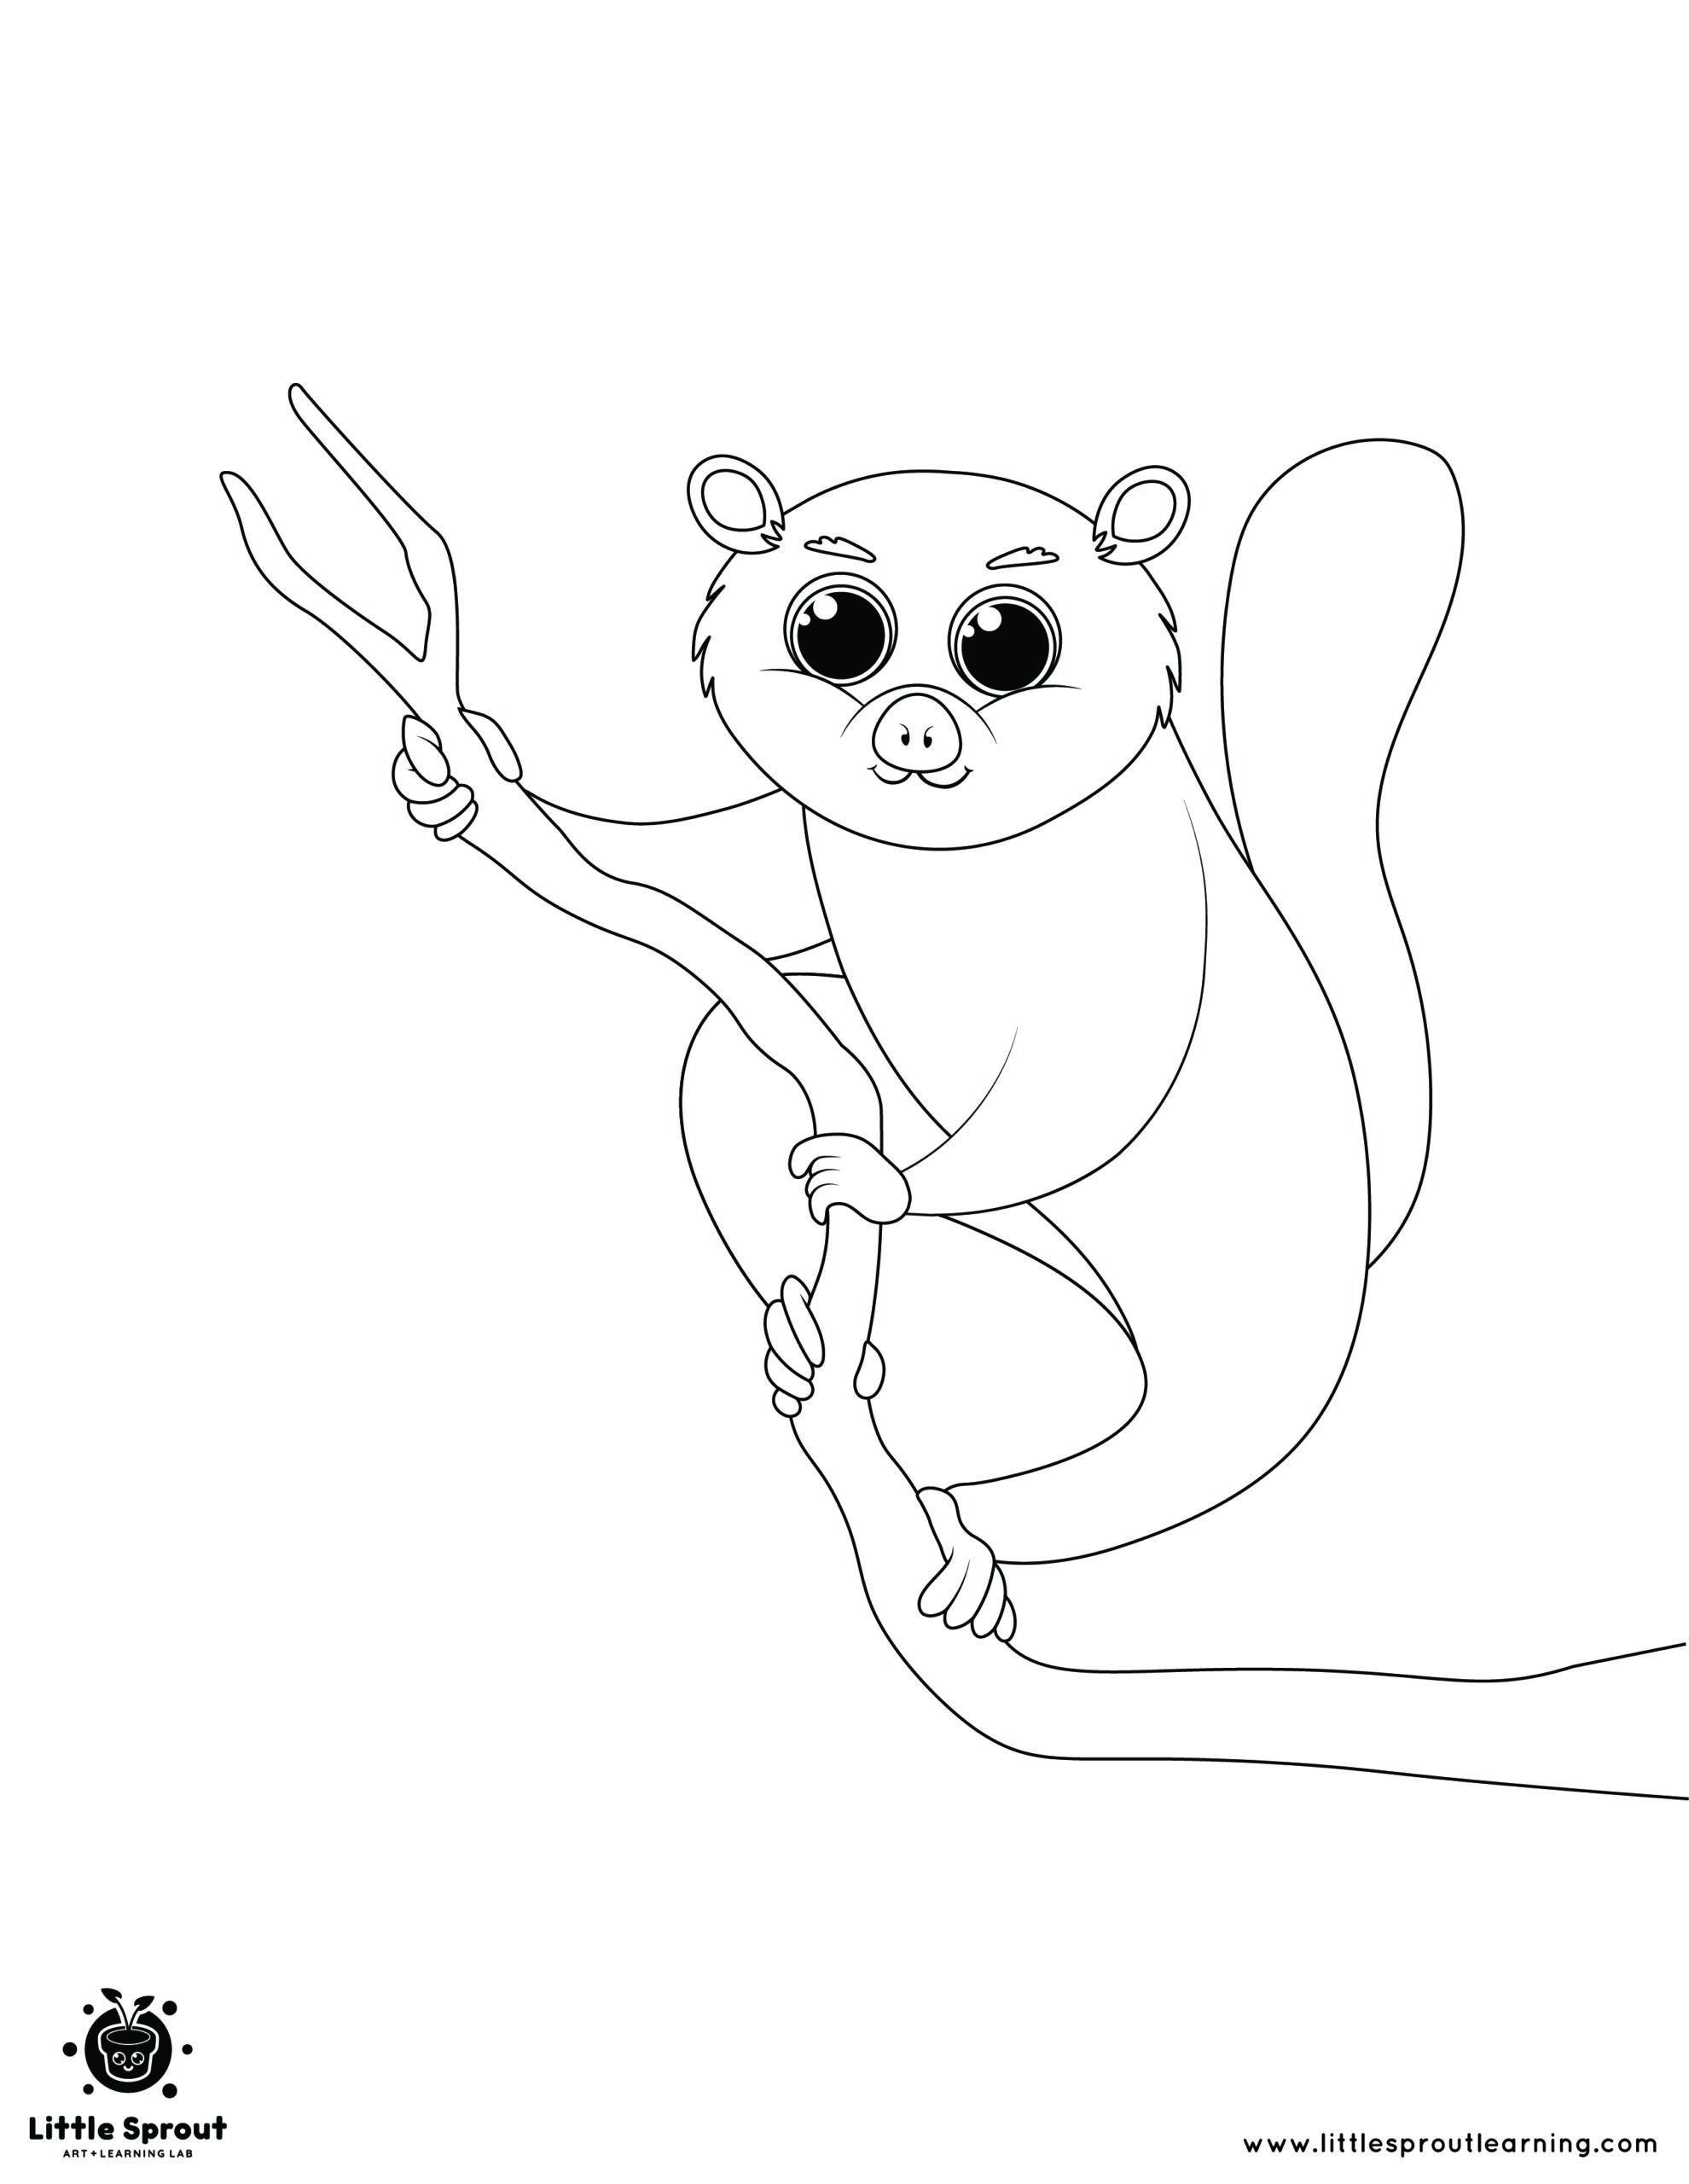 Fat Tailed Lemur Hanging on a Branch – Hibernating Animals Coloring Page